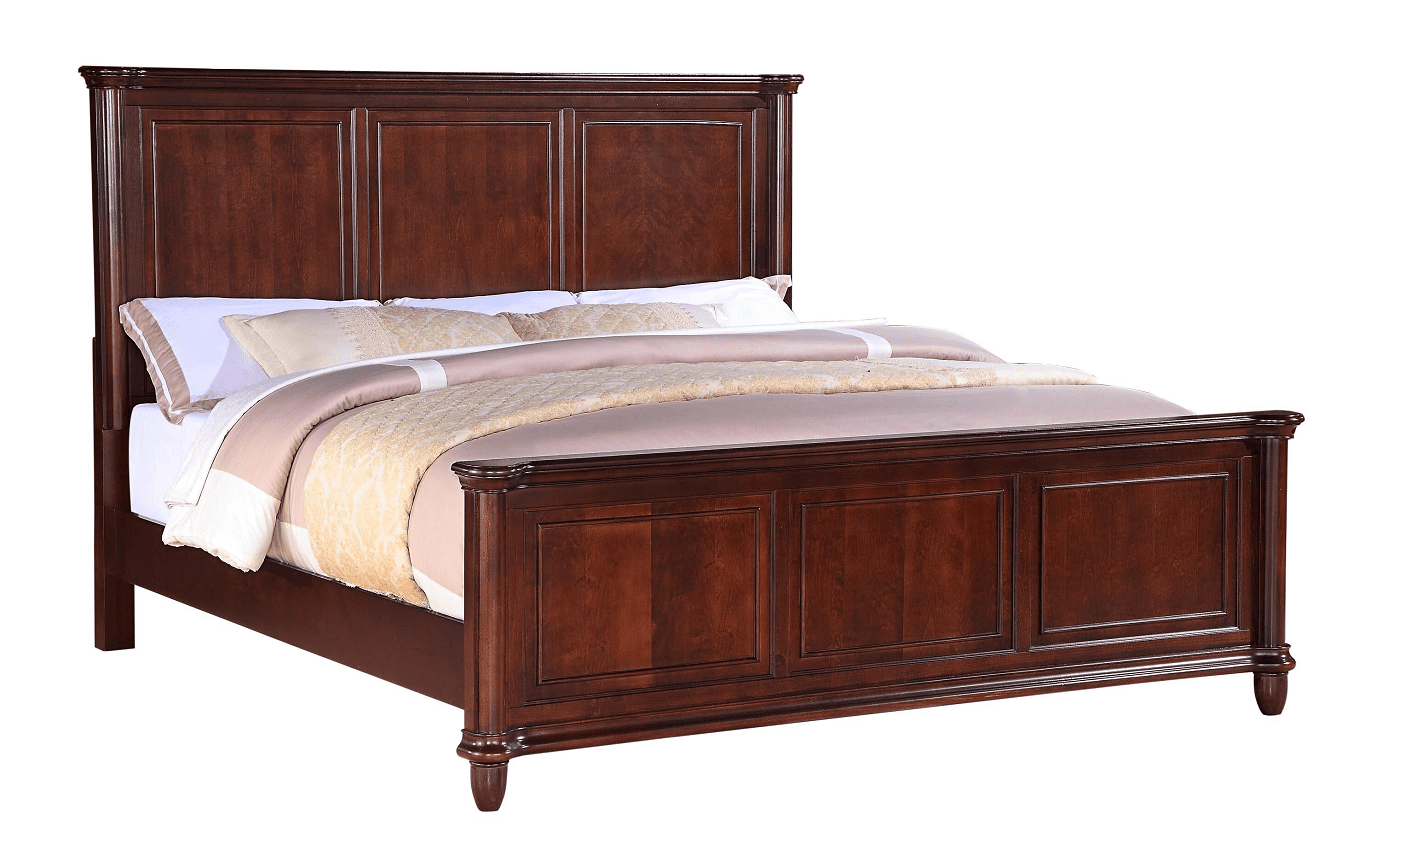 Queen Hamilton Bed Frame by Elements